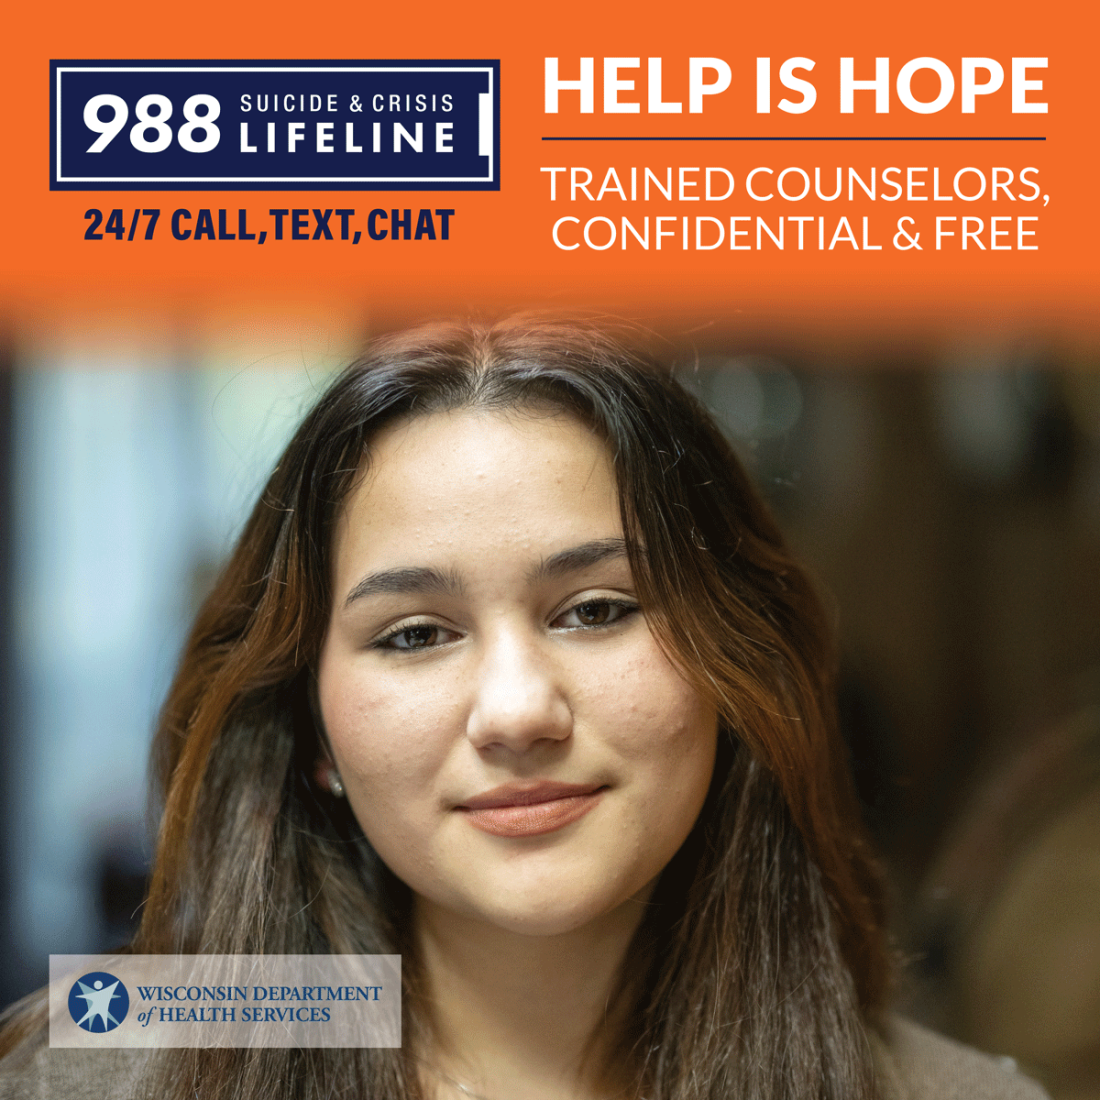 Youth - Help is hope - 988 Suicide & Crisis Lifeline